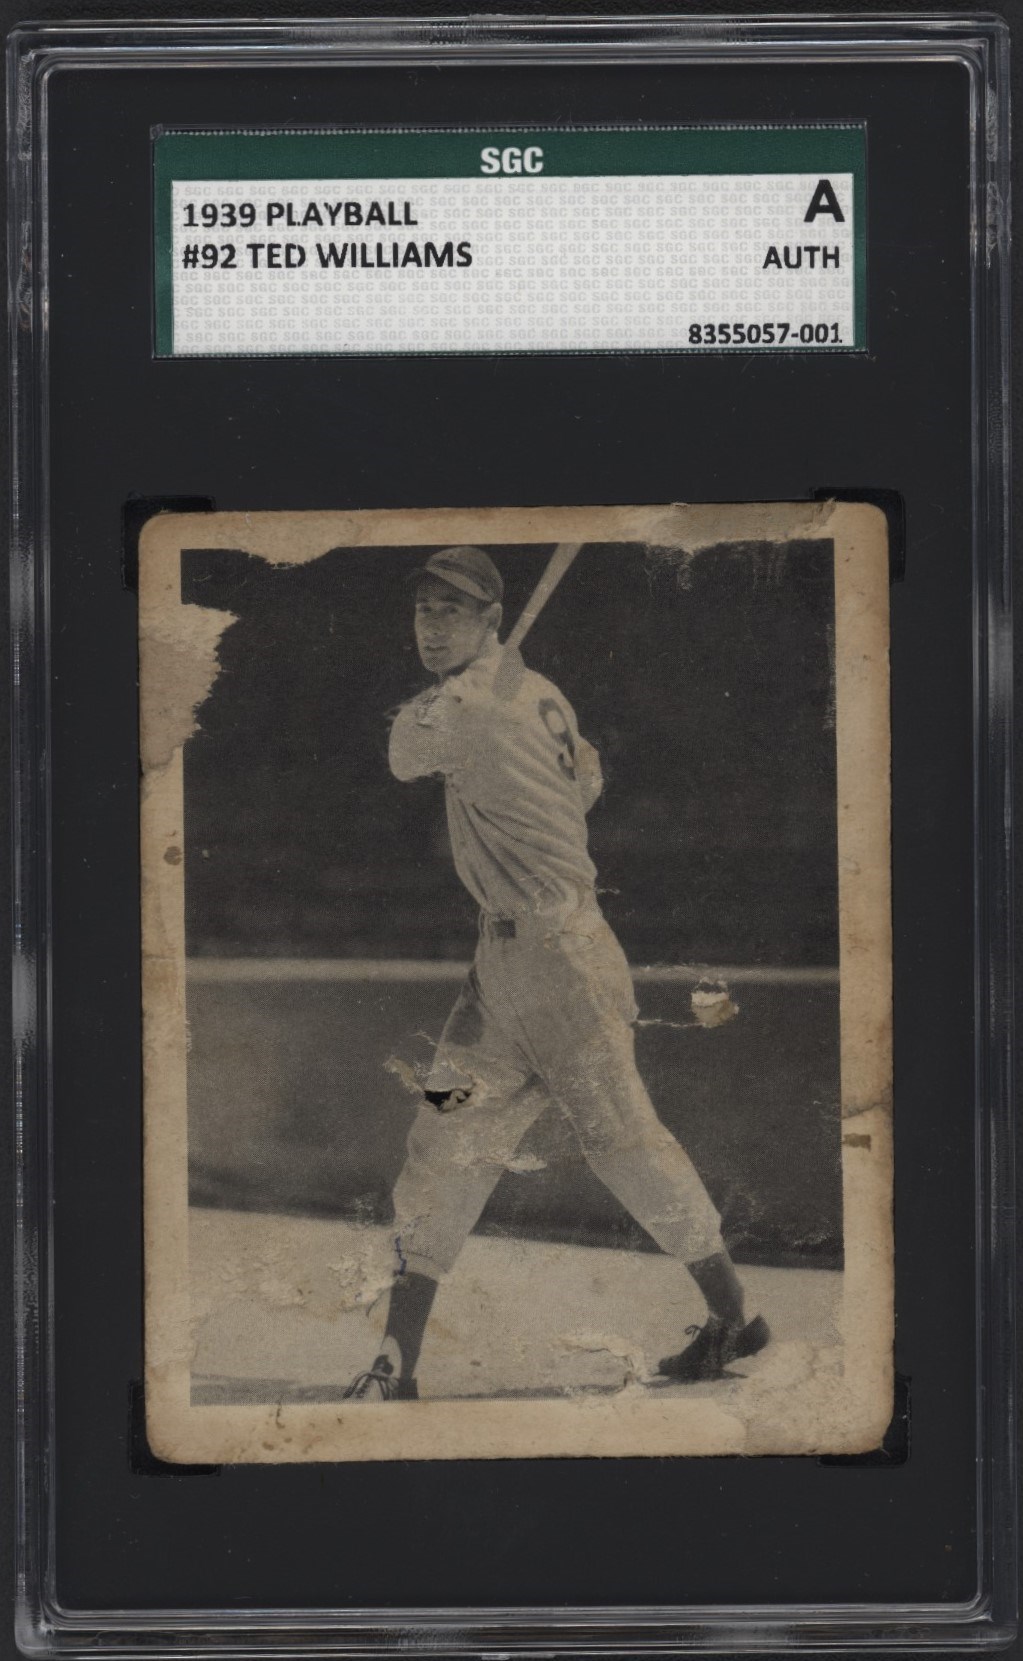 - 1939 Playball Ted Williams #92 SGC A